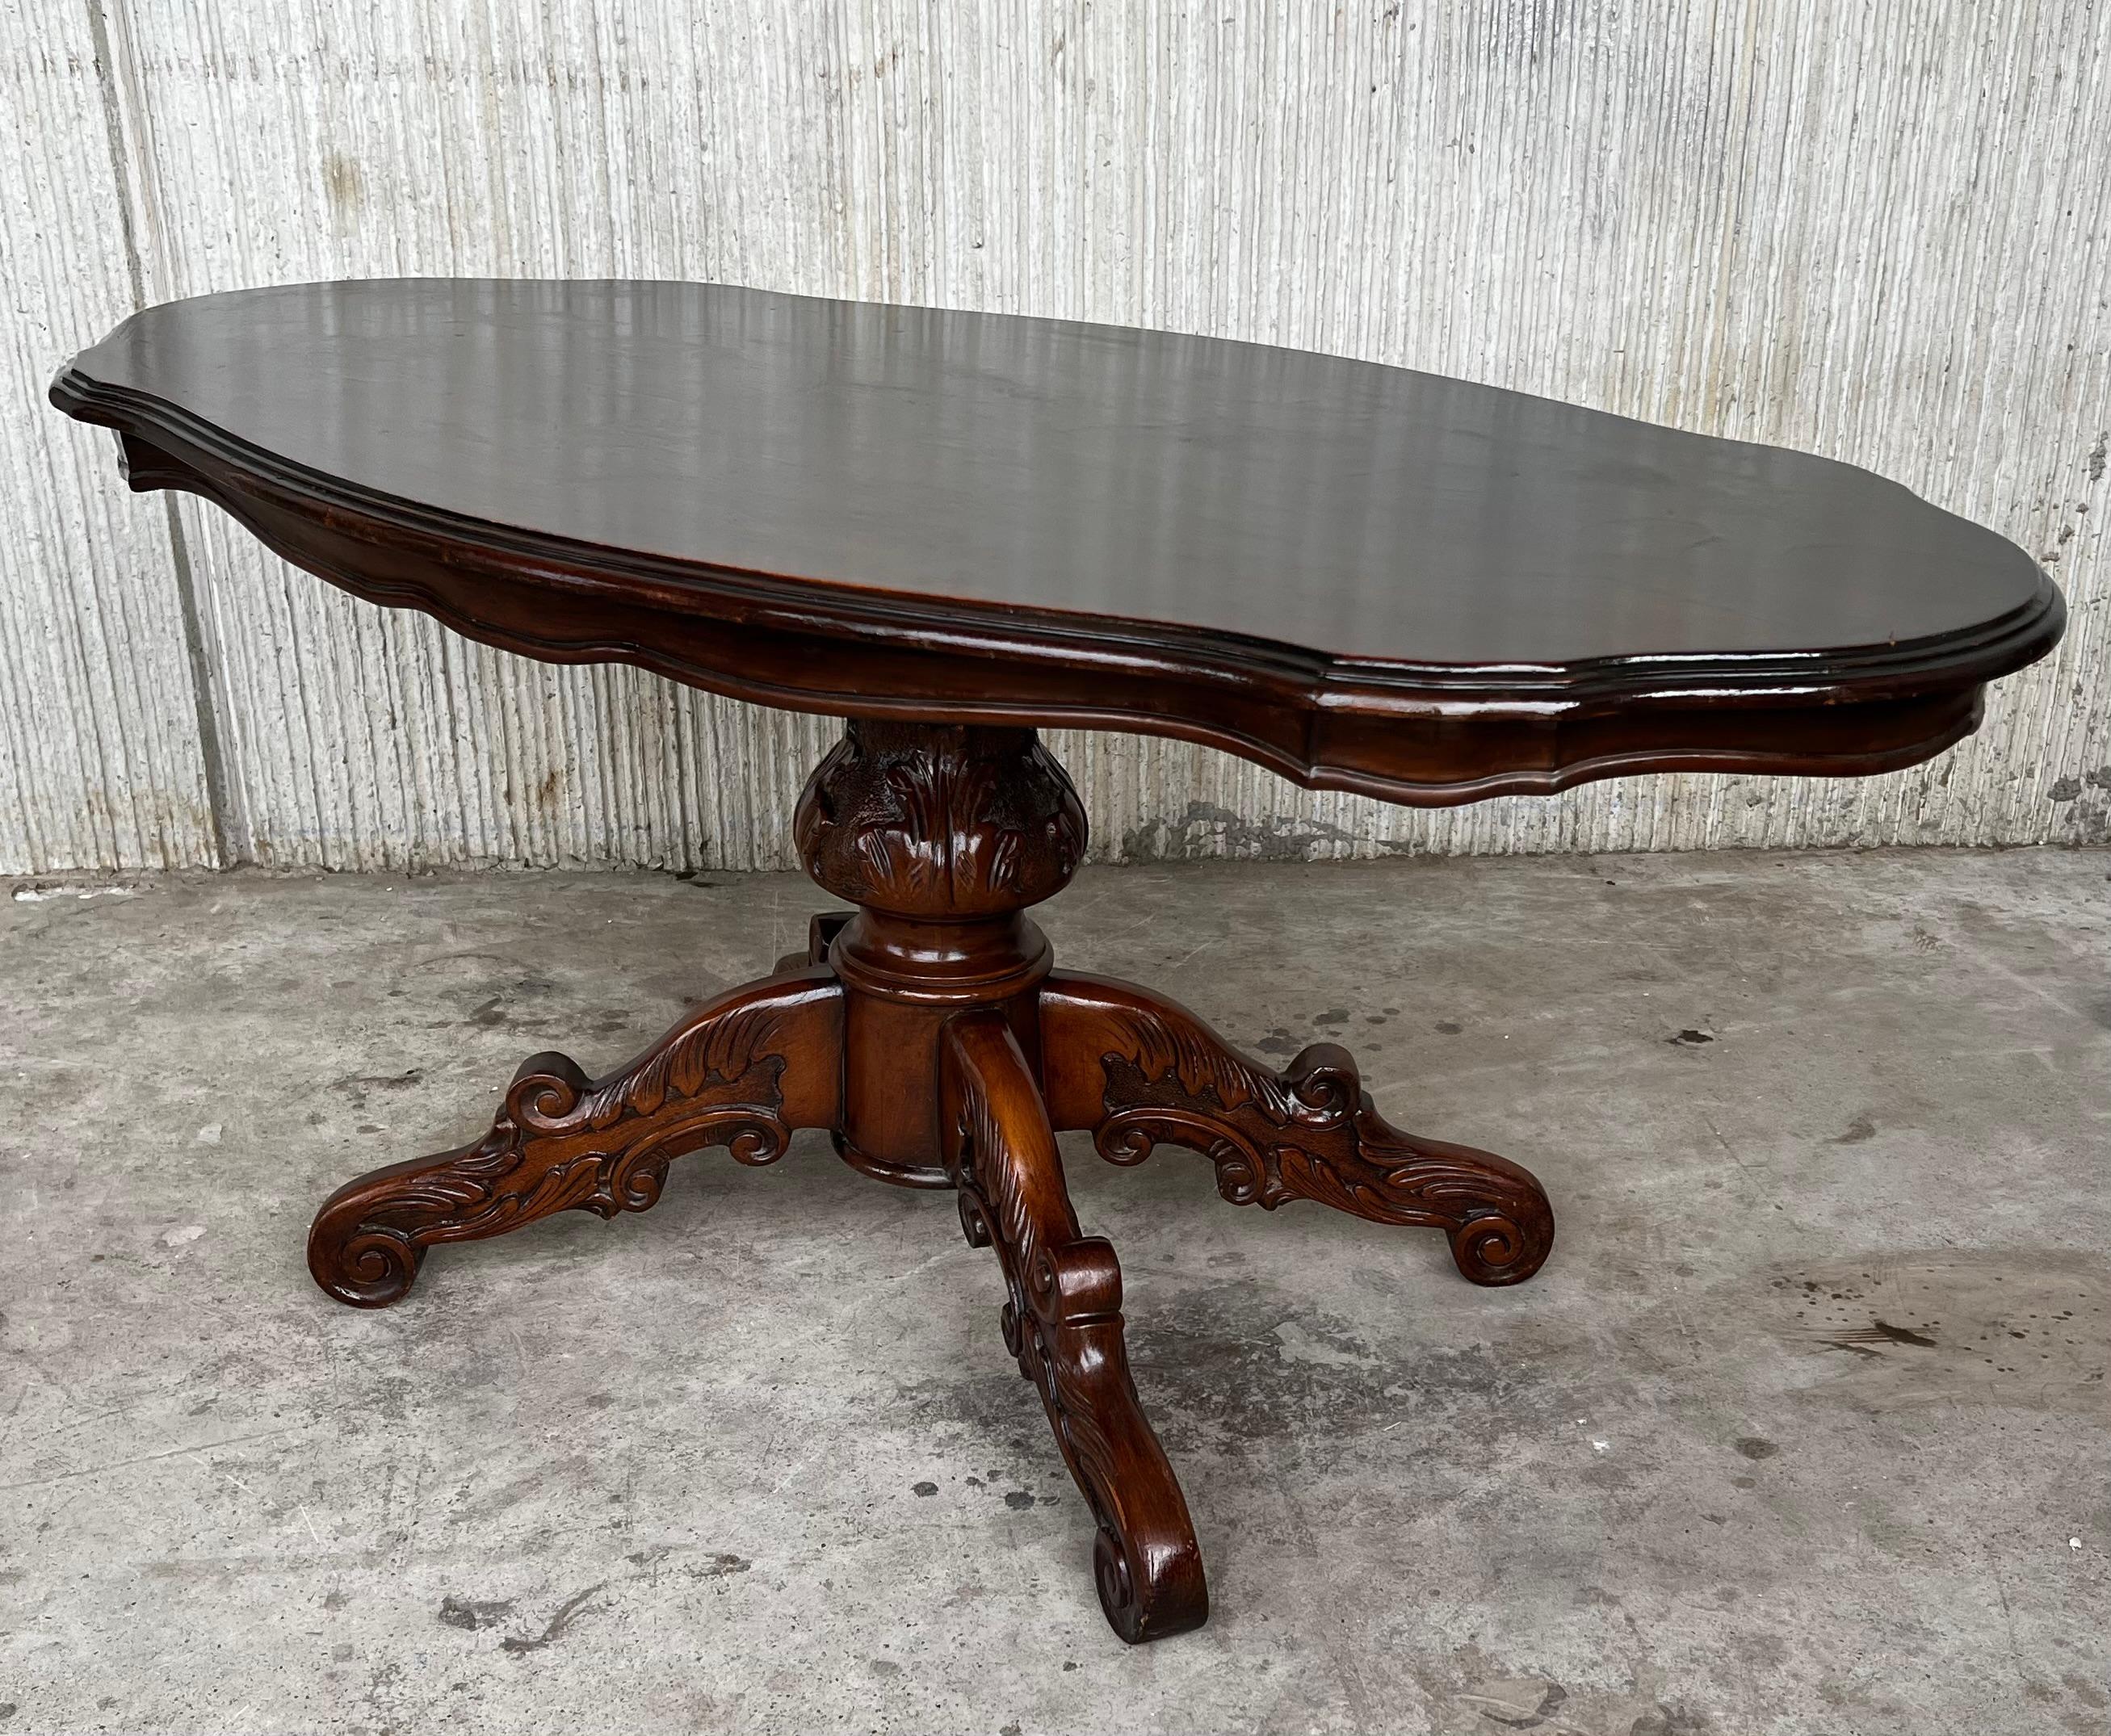 Spanish Colonial 20th Century Spanish Mariano Garcia Carved Pedestal Coffee Table For Sale